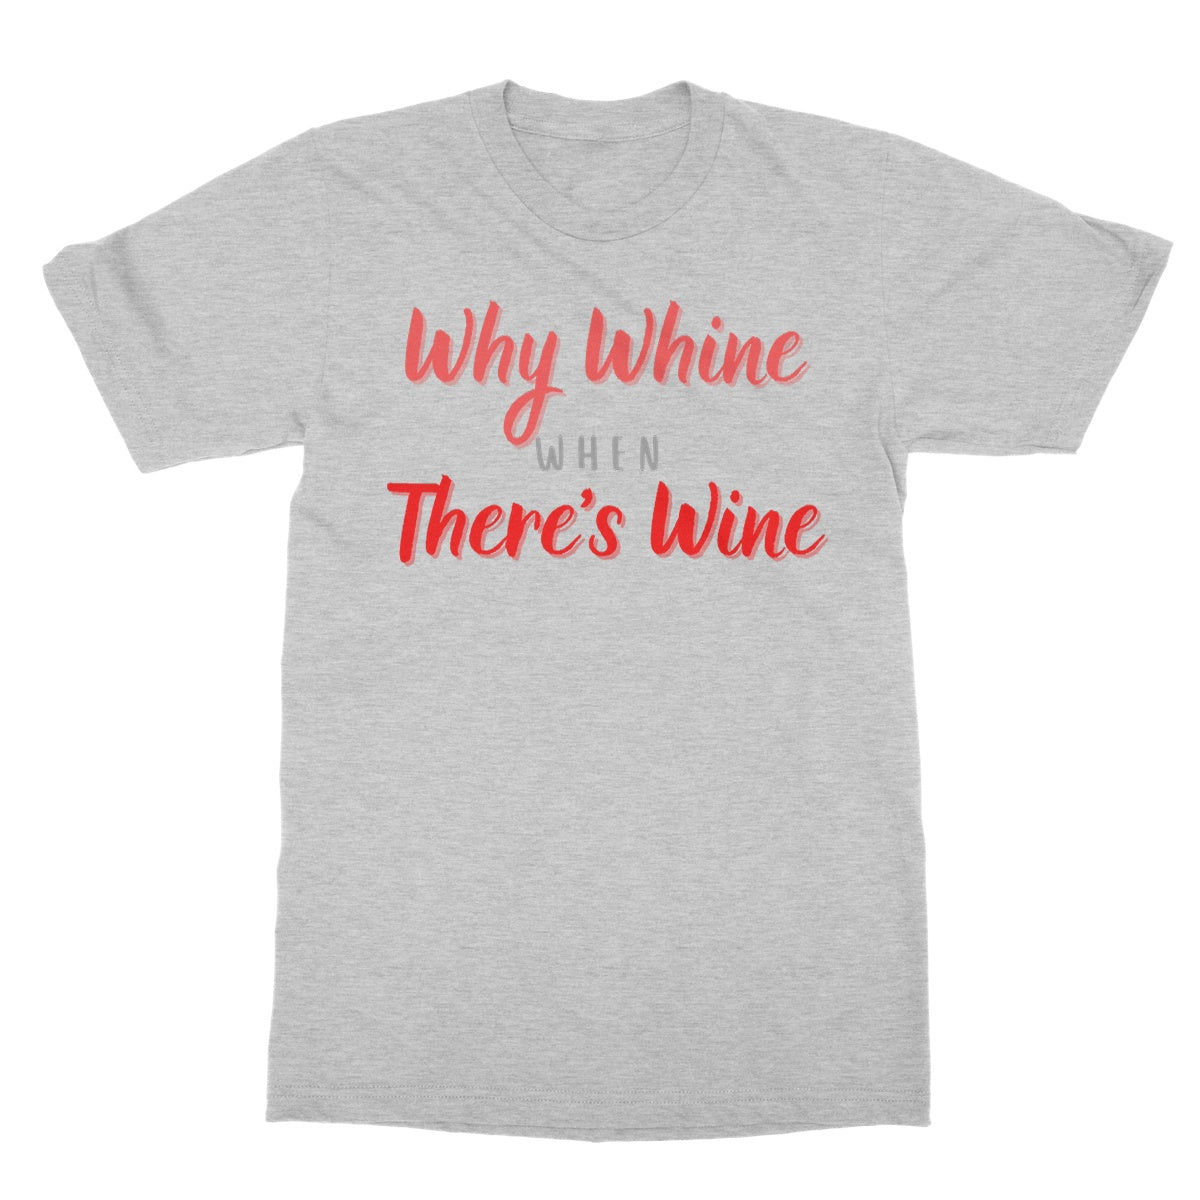 why whine when there's wine t shirt grey